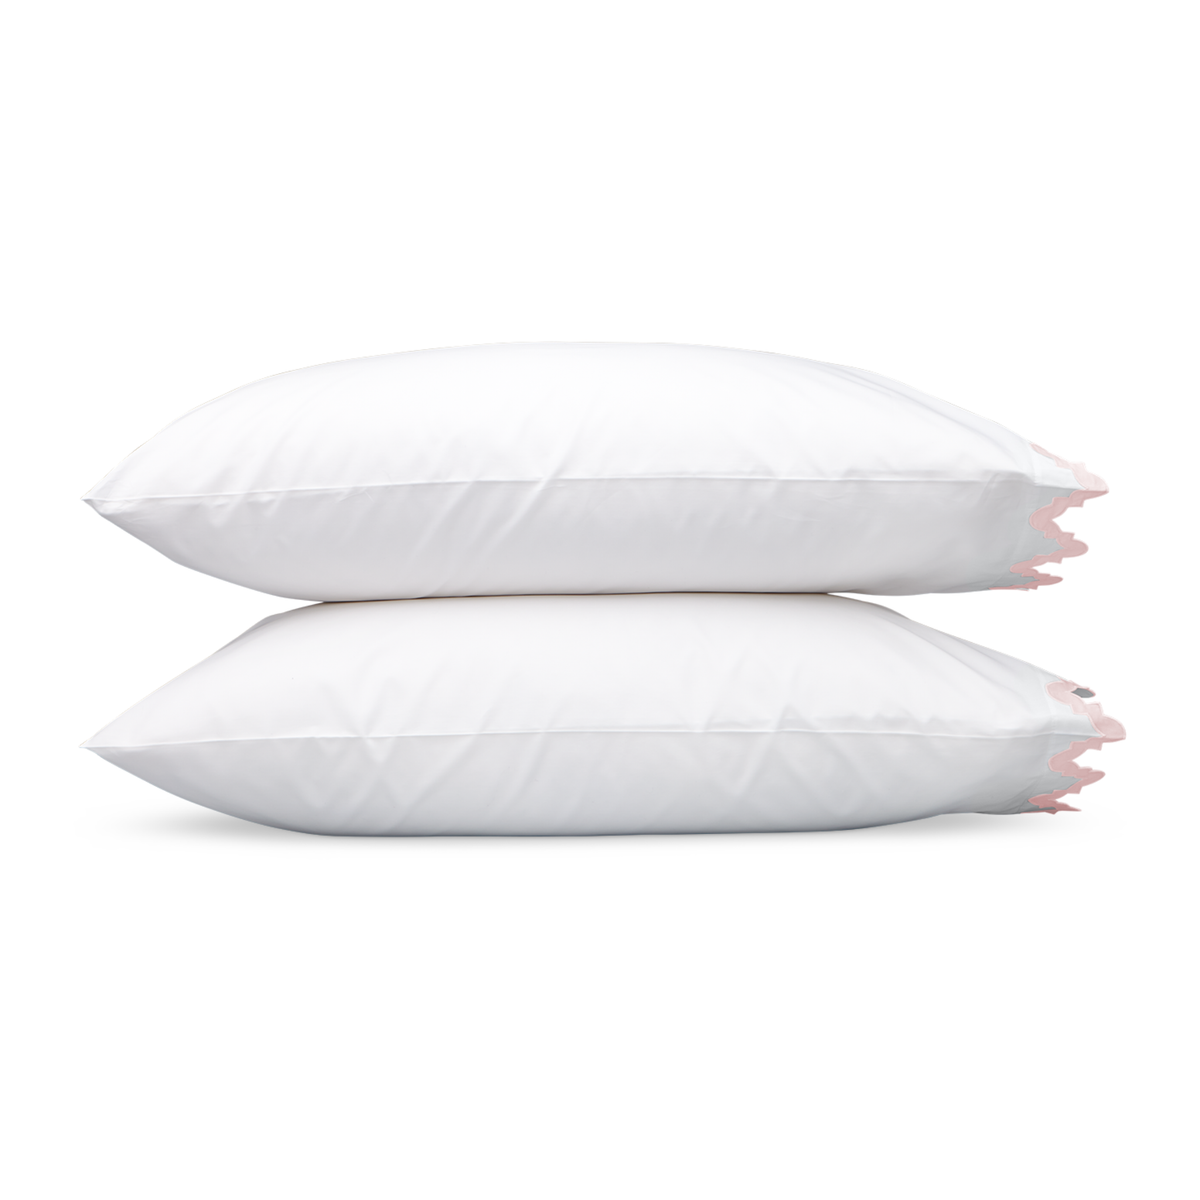 Pair of Pillowcases of Matouk Aziza Bedding in Pink Color